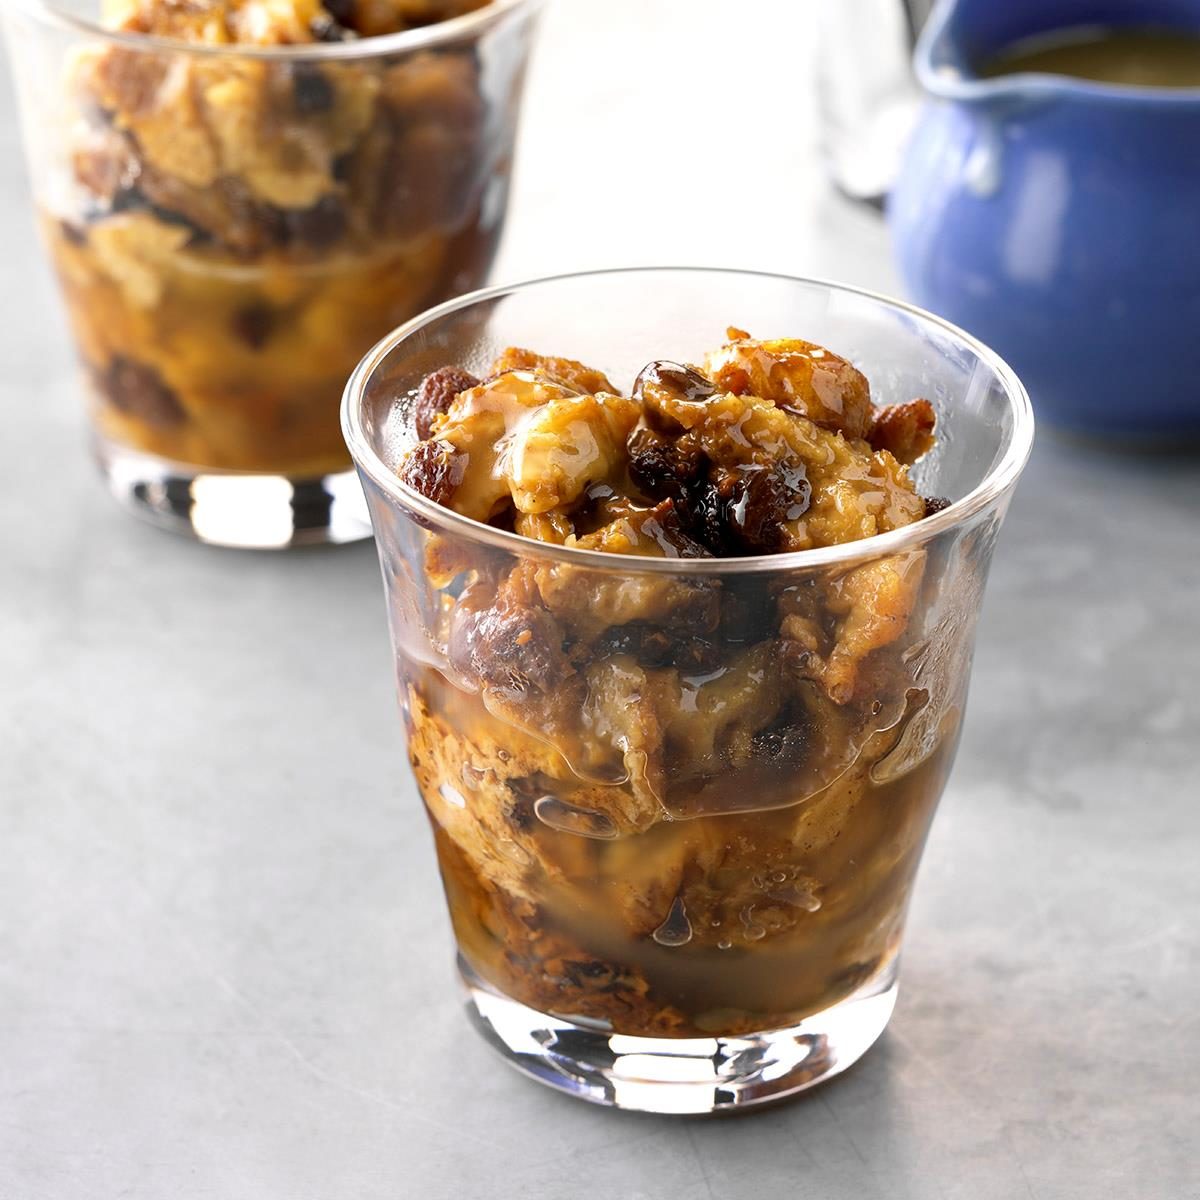 Day 14: Bread Pudding with Bourbon Sauce